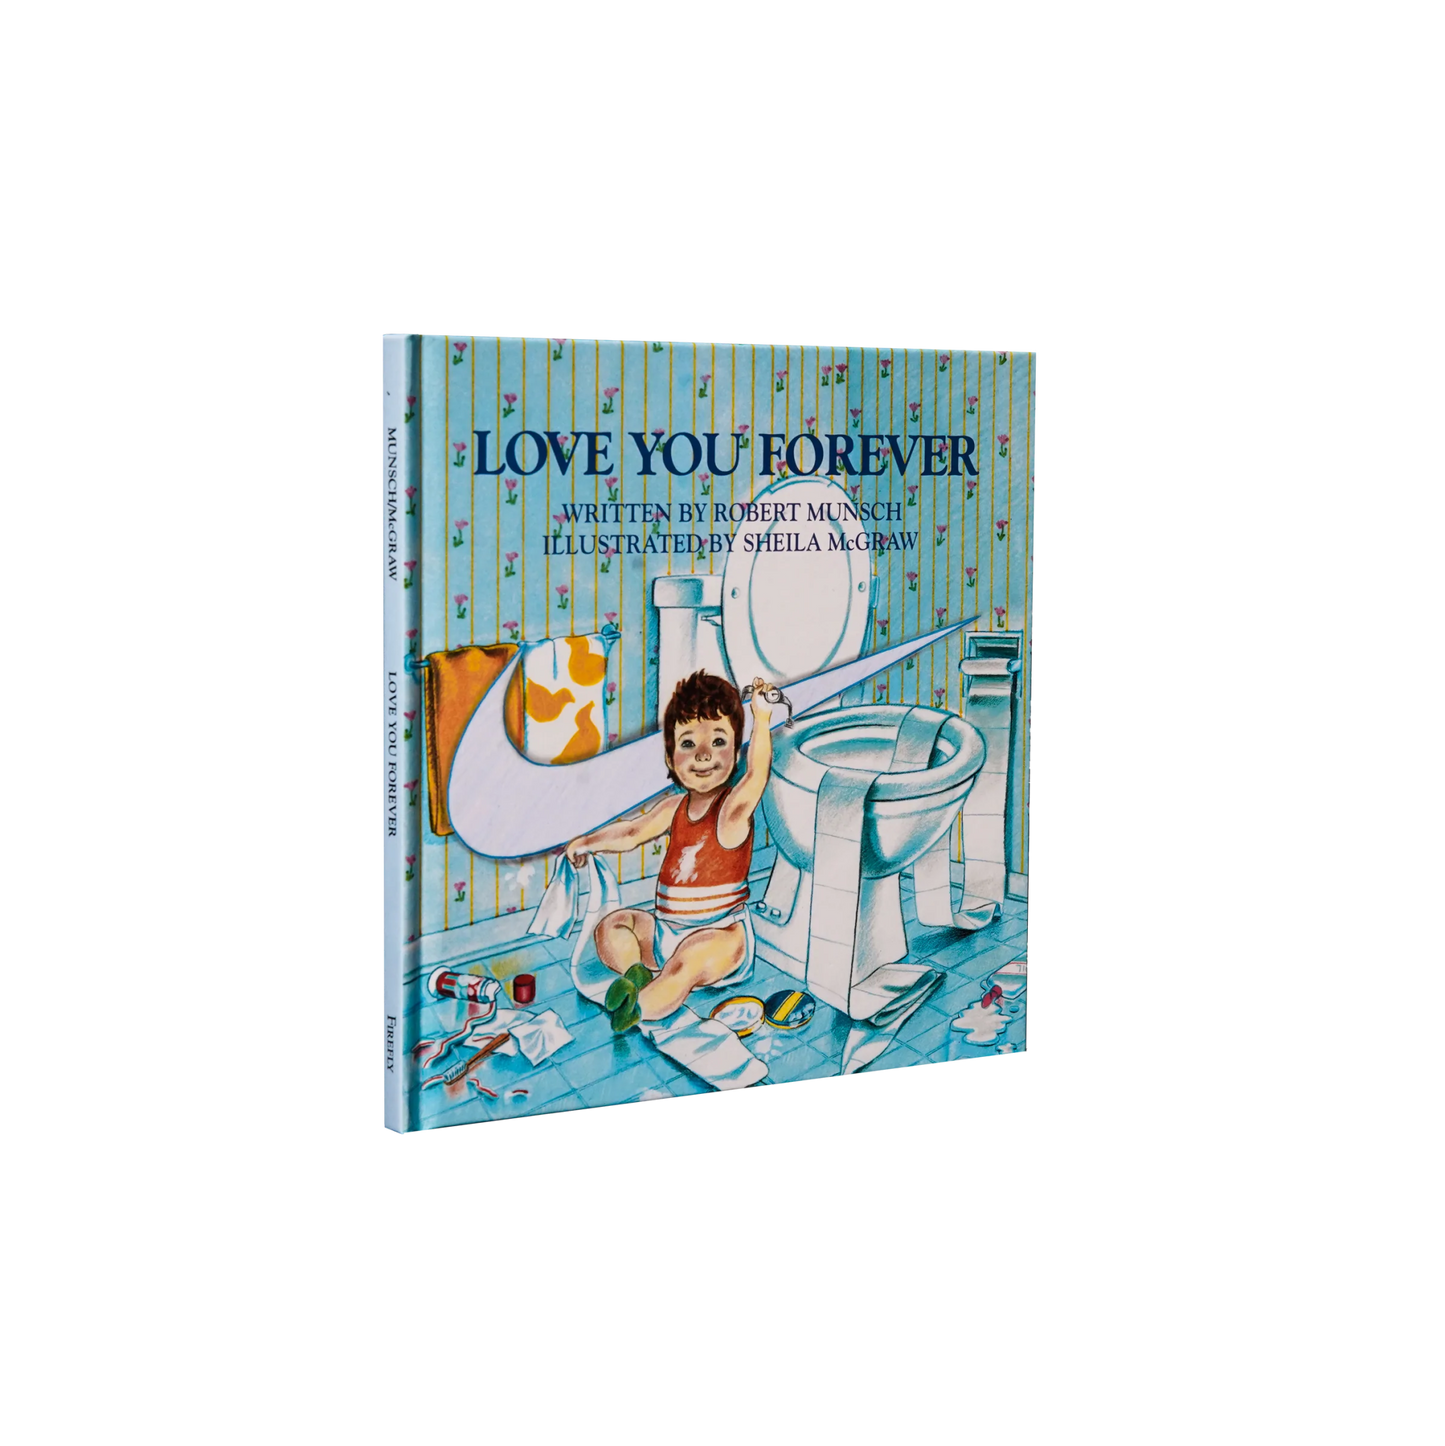 Love You Forever by Robert Munsch - Nike Swoosh Edition (NOCTA Exclusive) Book - Supra Sneakers